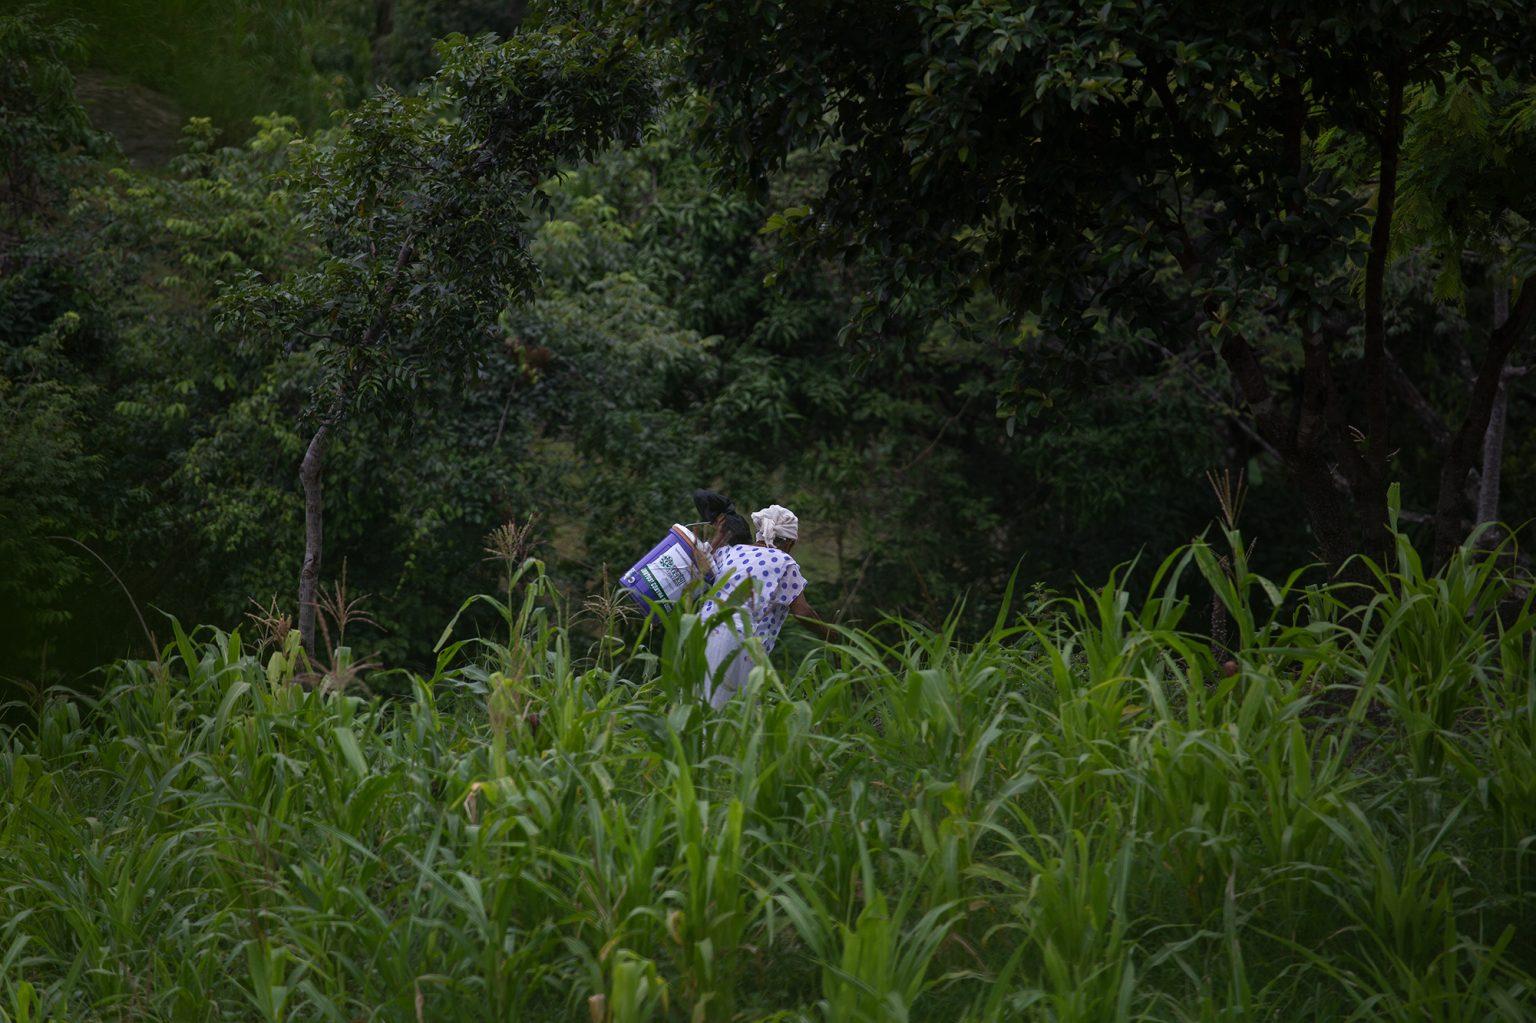 A woman crosses the corn field with a water filter on her back. The water filter, delivered by the Honduran Red Cross, will help her family purify the water consumed directly from the closest water source, the closest thing at the moment to potable water. Curarén, August 27 2020. Photo: Martín Cálix